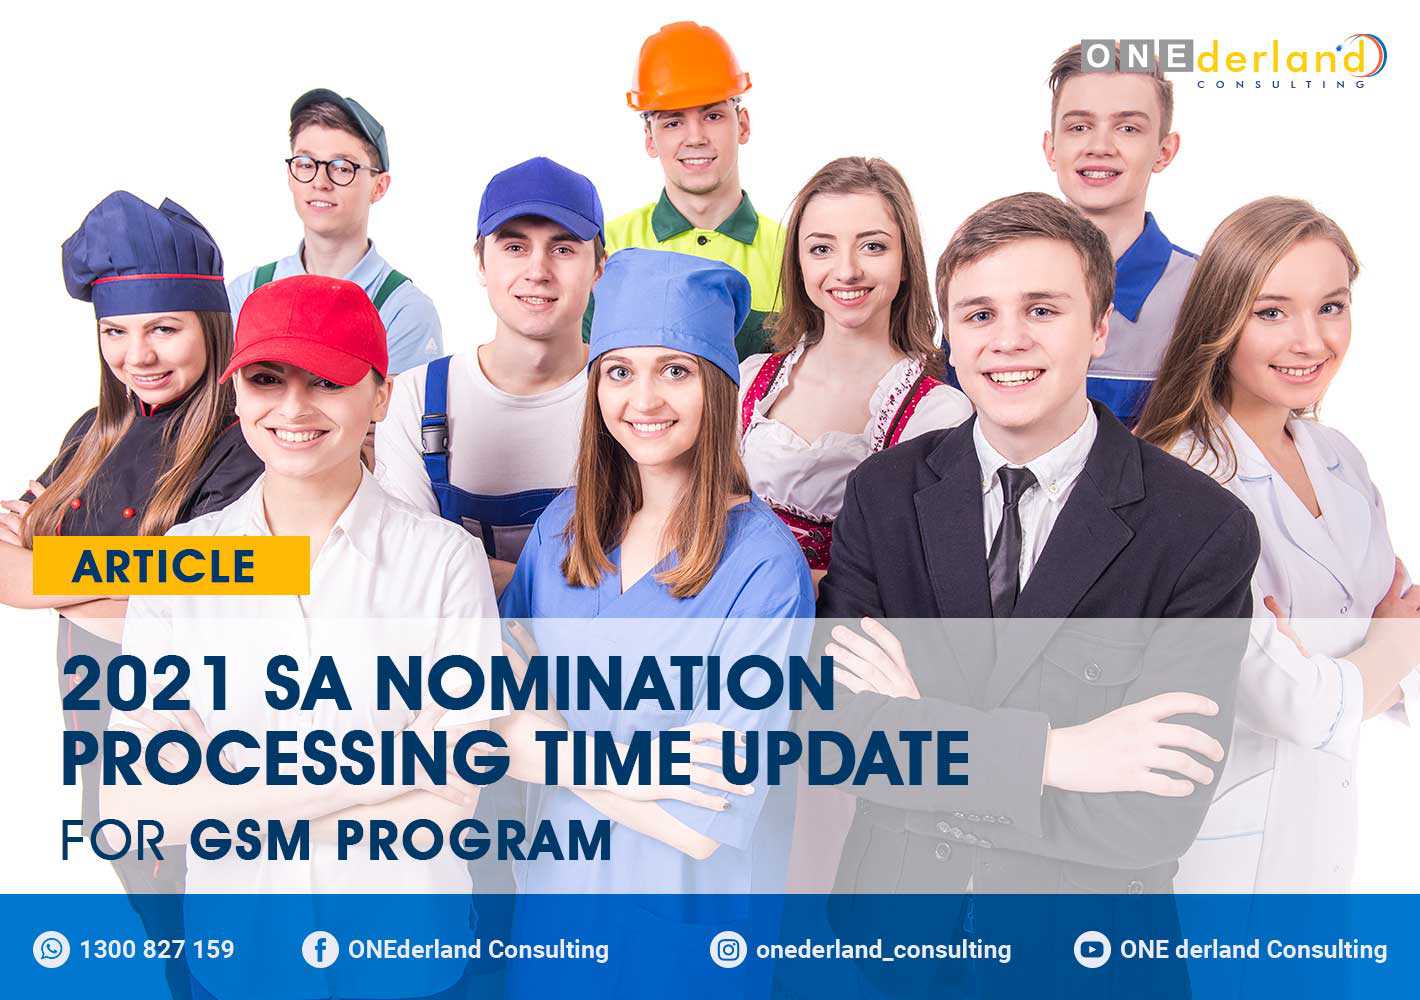 SA Government Updates the Nomination Processing Time for GSM Program